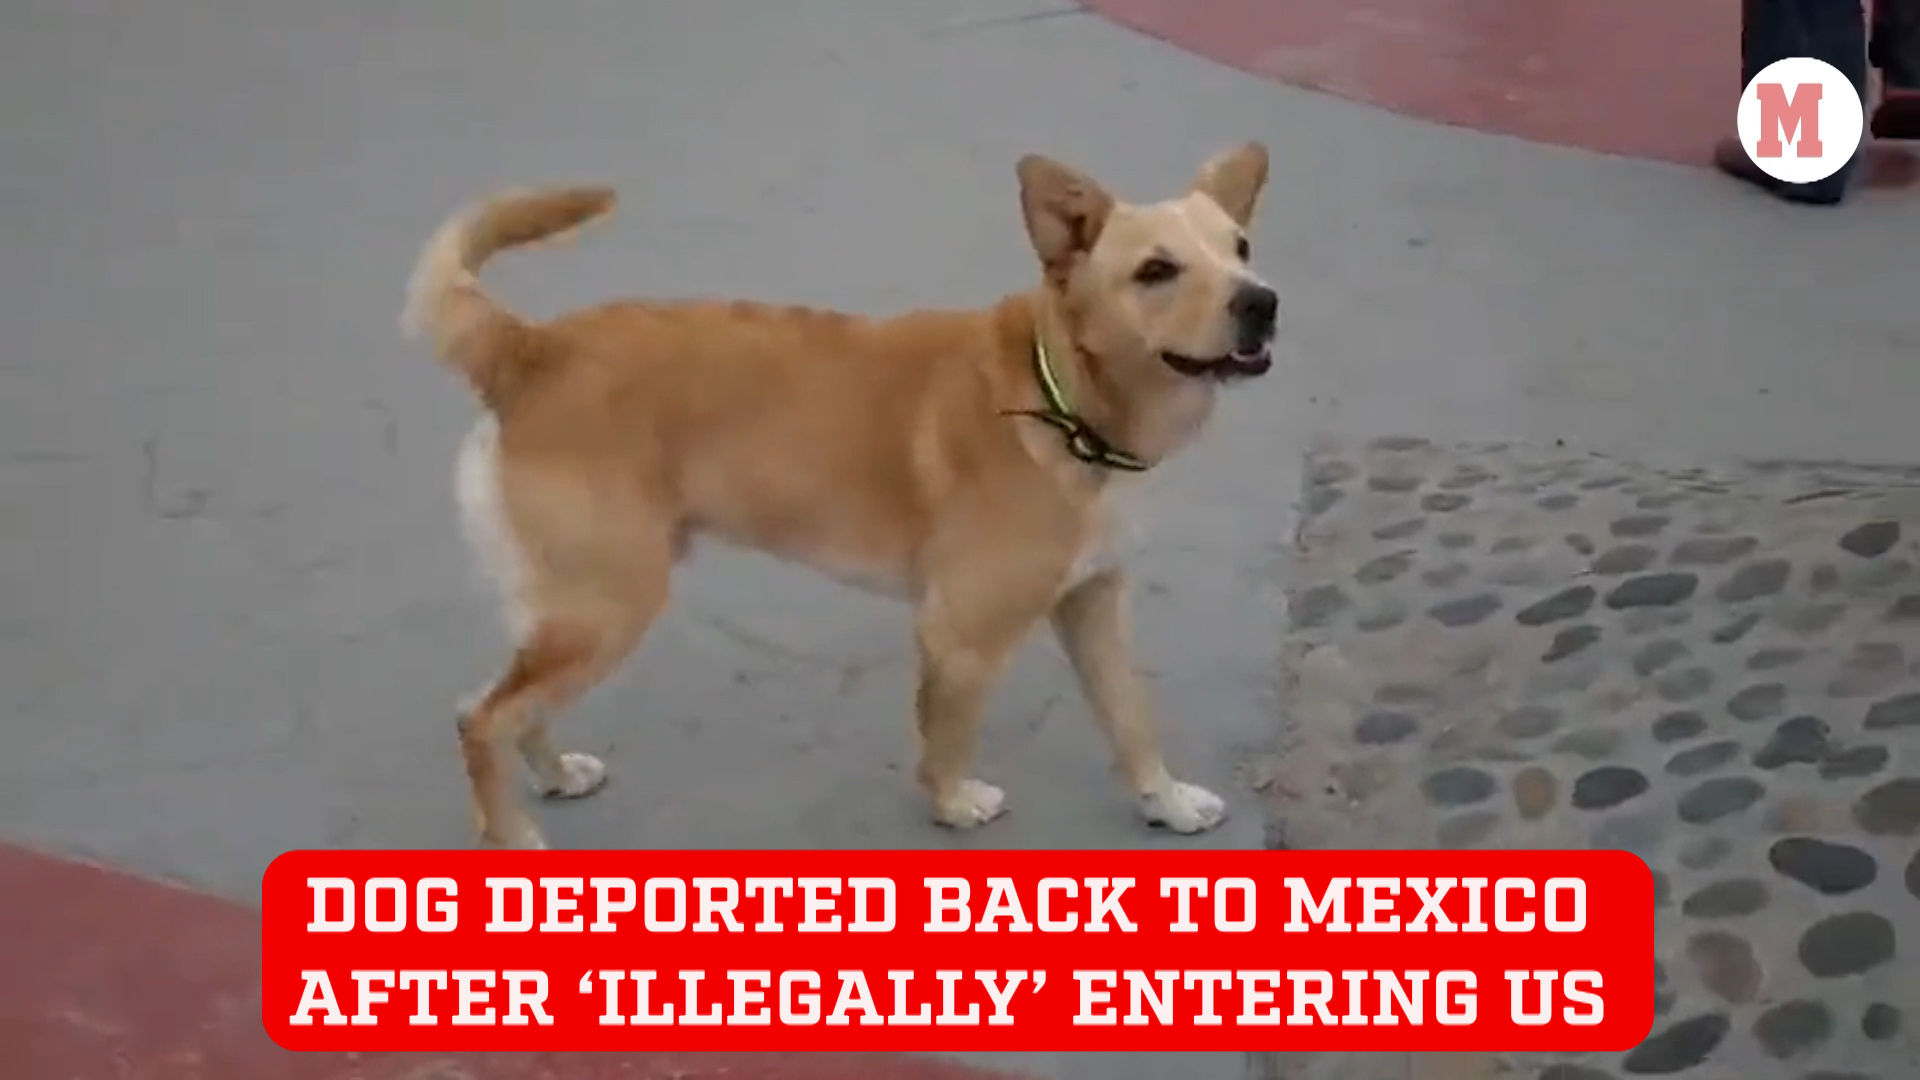 Adorable dog gets deported back to Mexico after 'illegally' crossing into US through gap in border